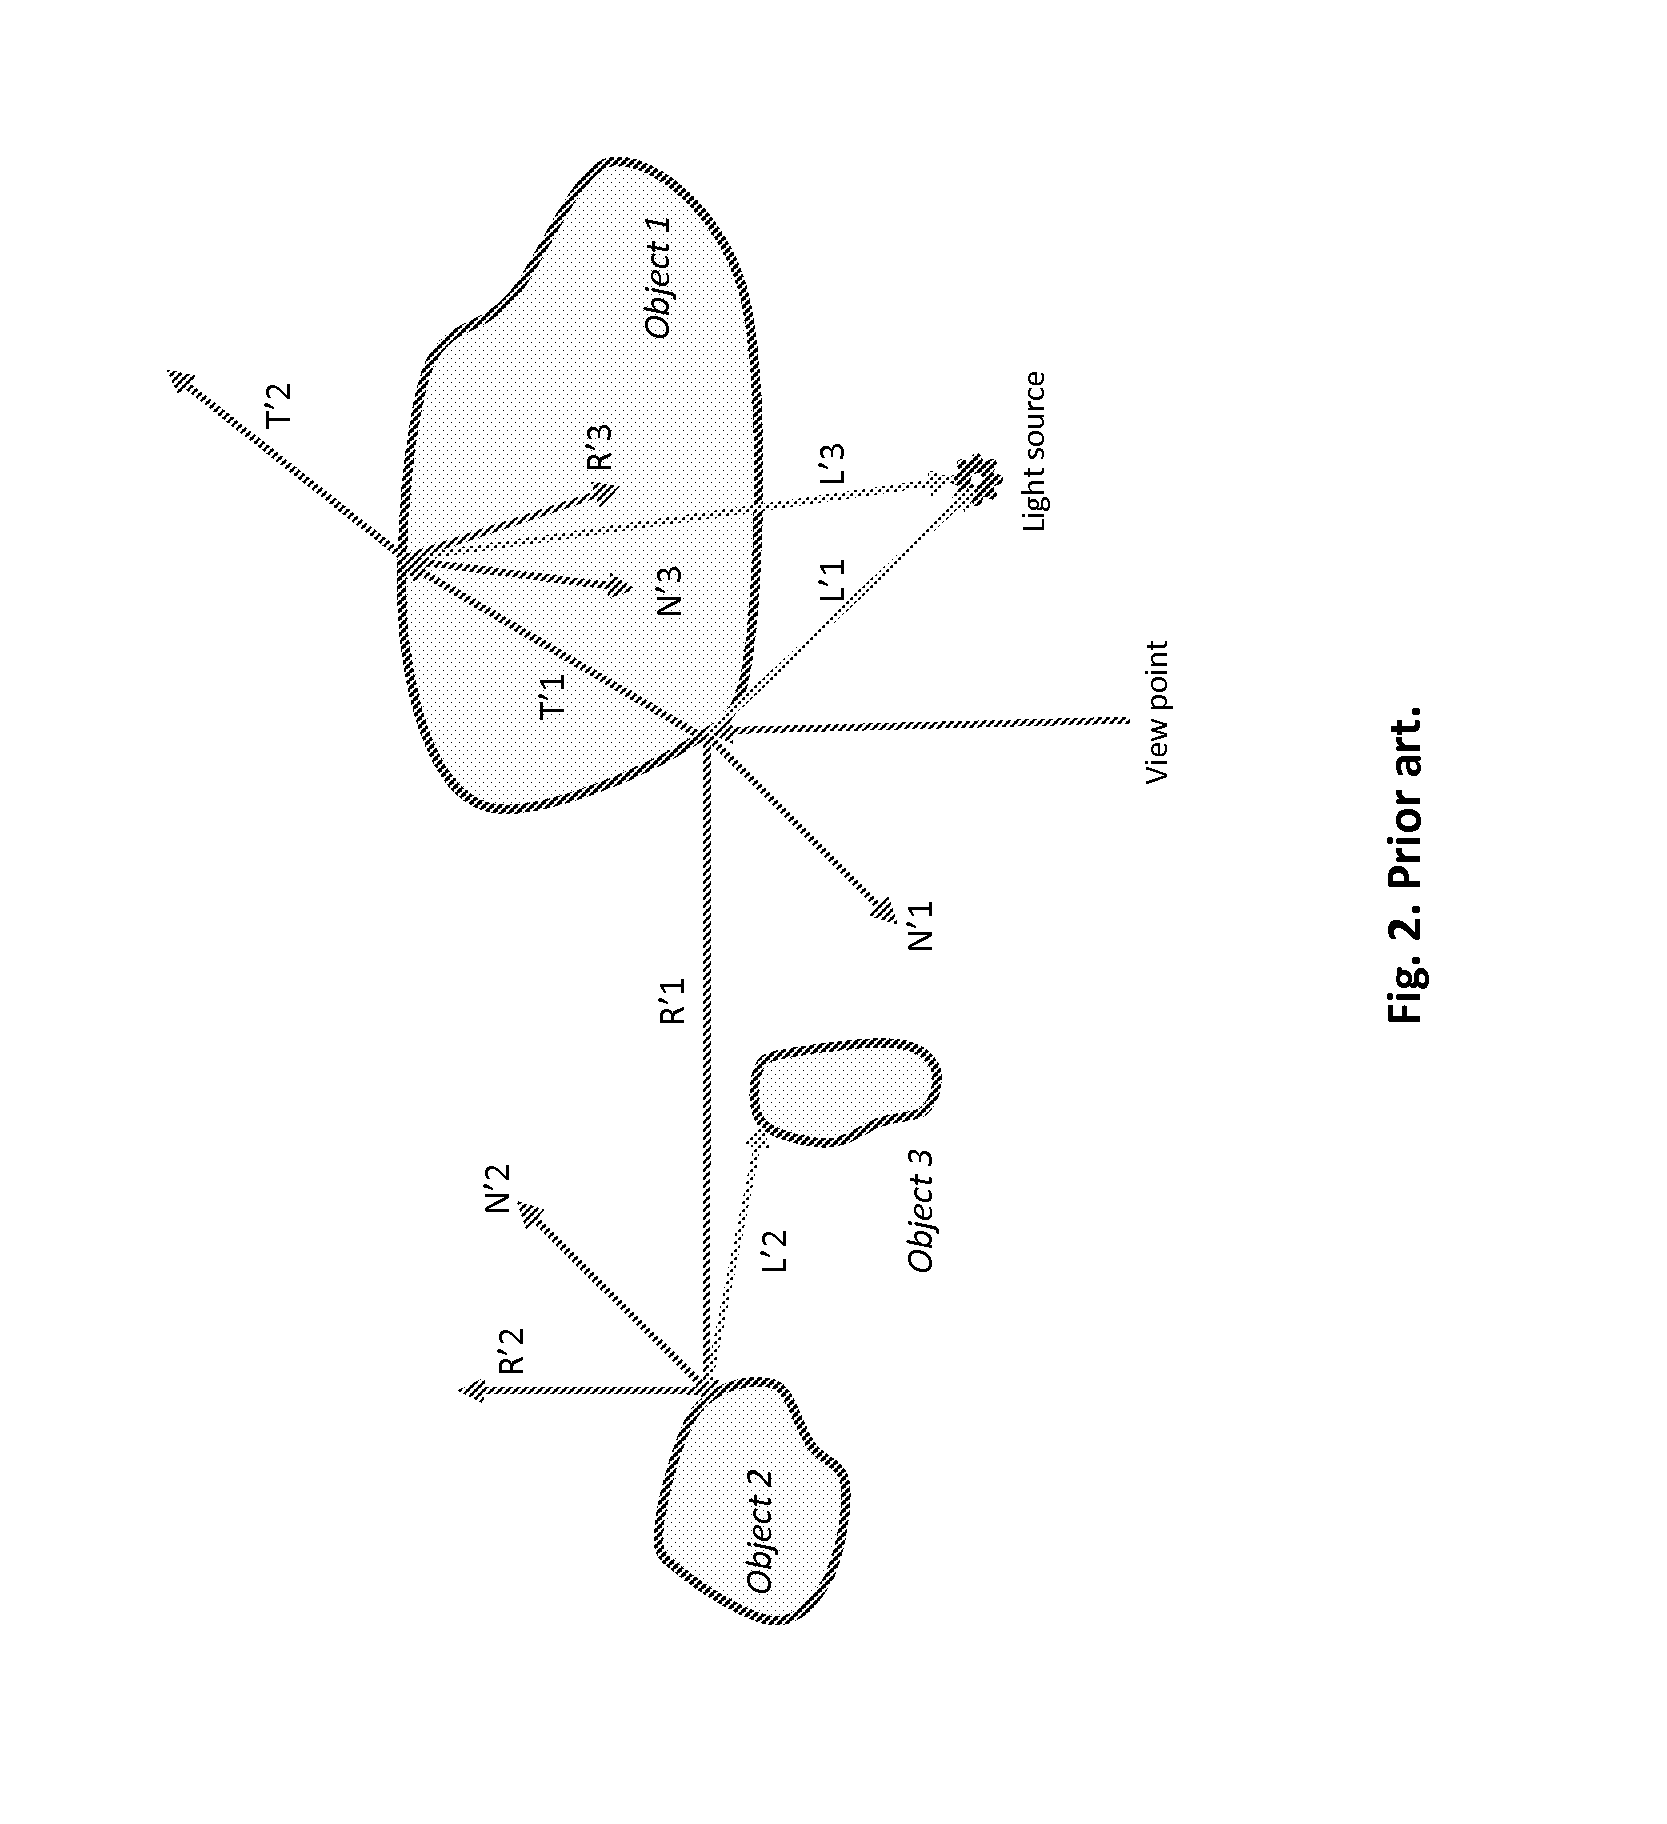 System for primary ray shooting having geometrical stencils